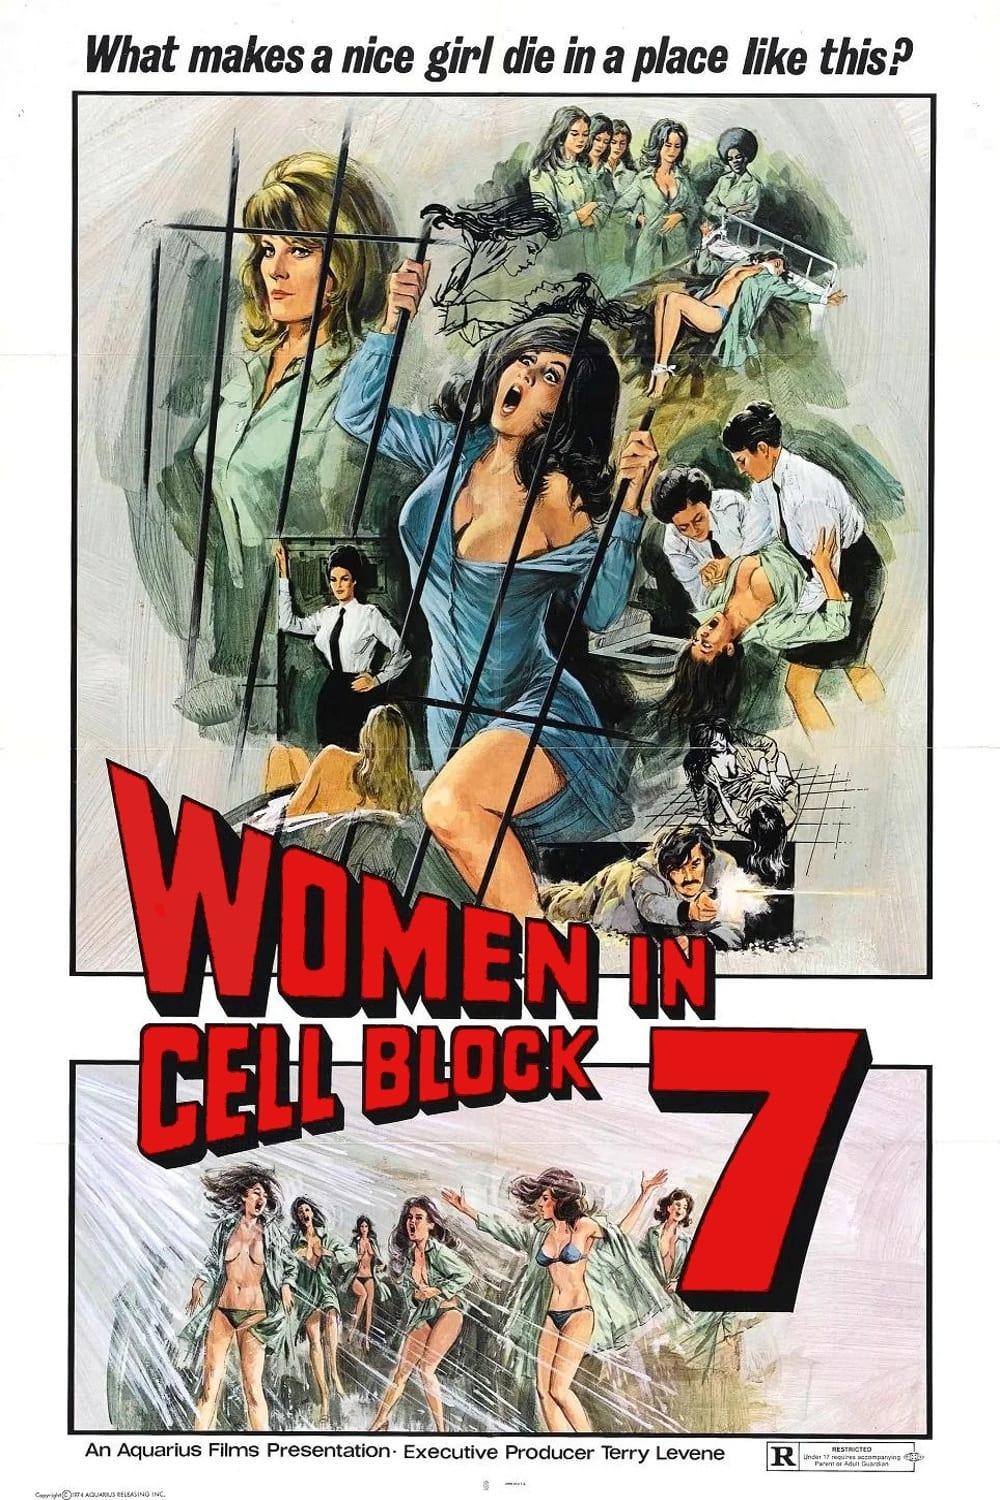 Women in Cell Block 7 poster